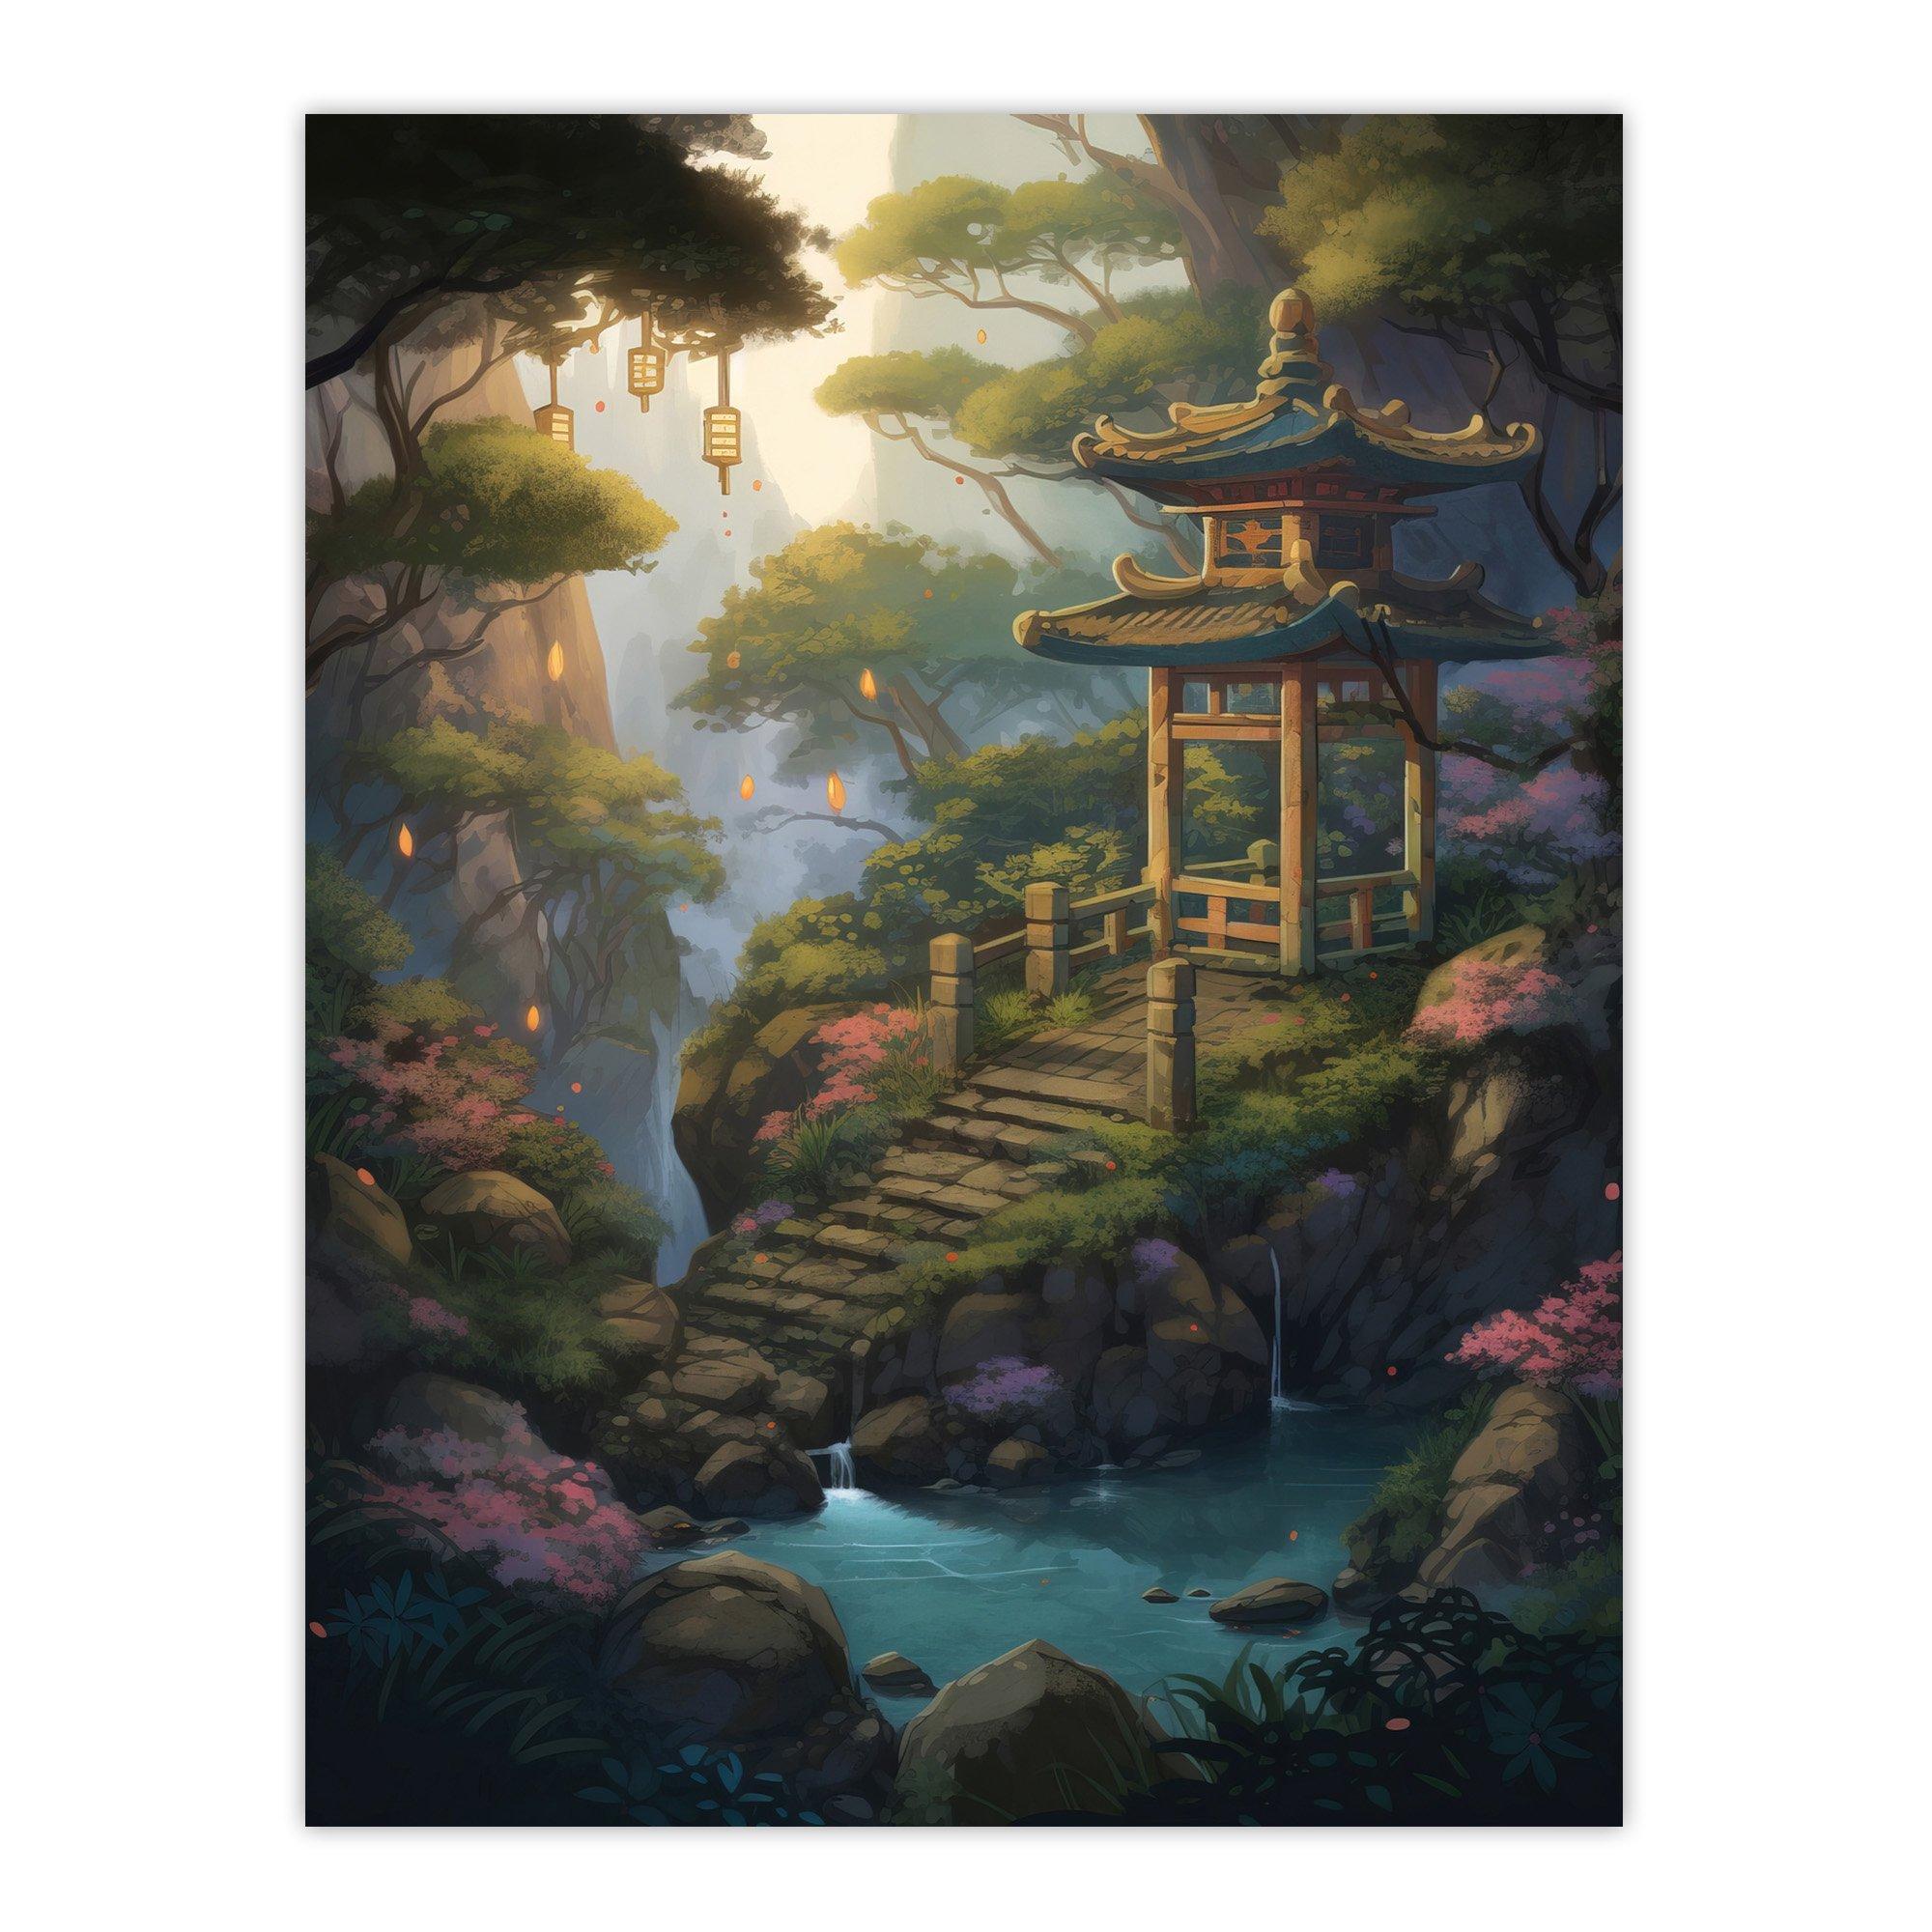 Artery8 Japan Garden Painting Traditional Tower and Tree Lanterns by Lake Spring Flowers and Bridge Unframed Wall Art Print Poster Home Decor Premium